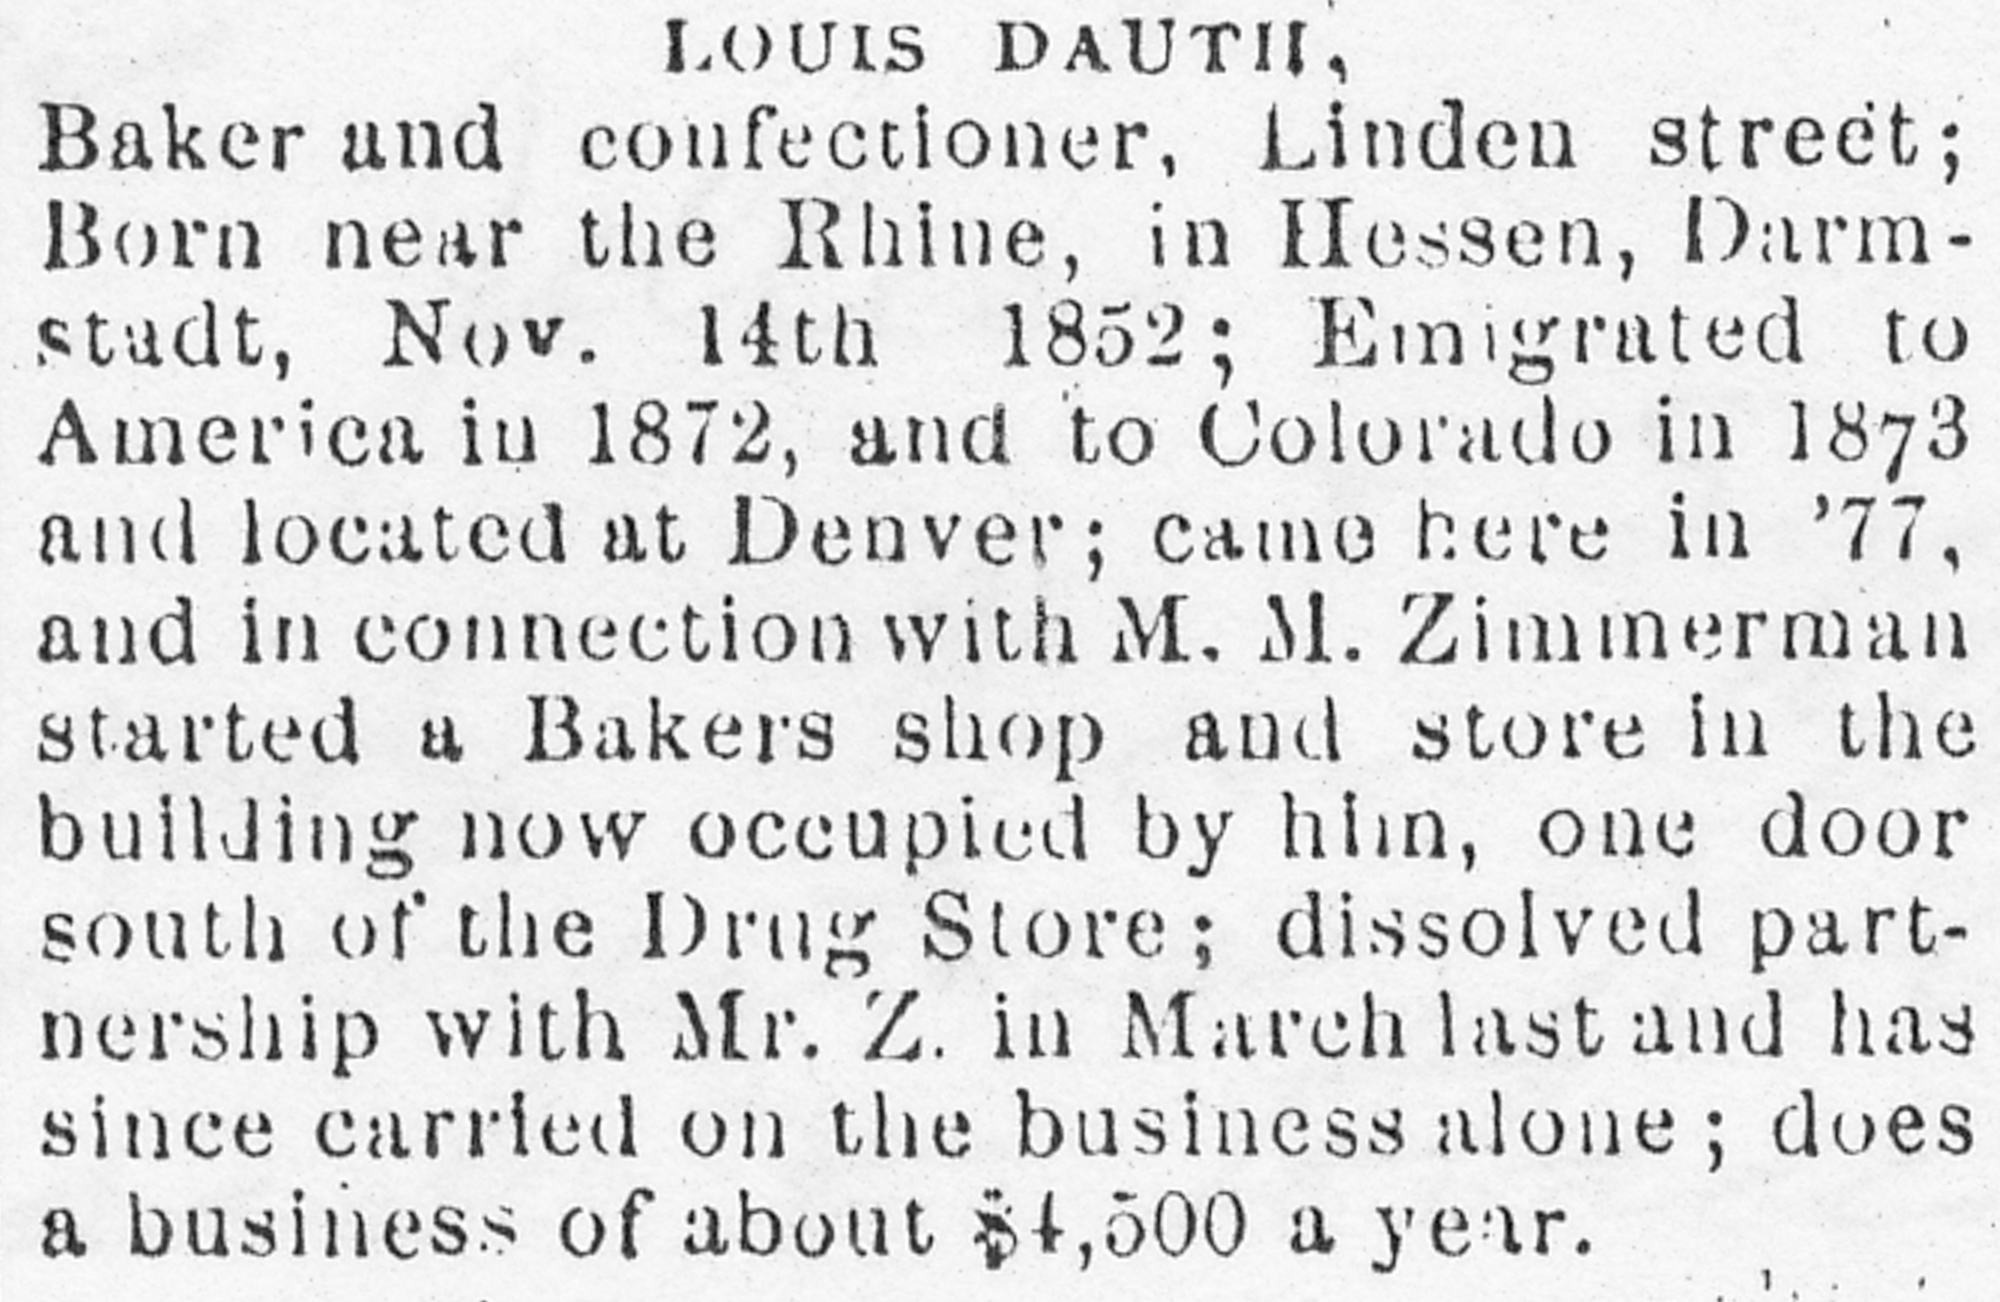 Dauth Family Archive - 1878-07-27 - The Courier - Business Profile of Louis Dauth